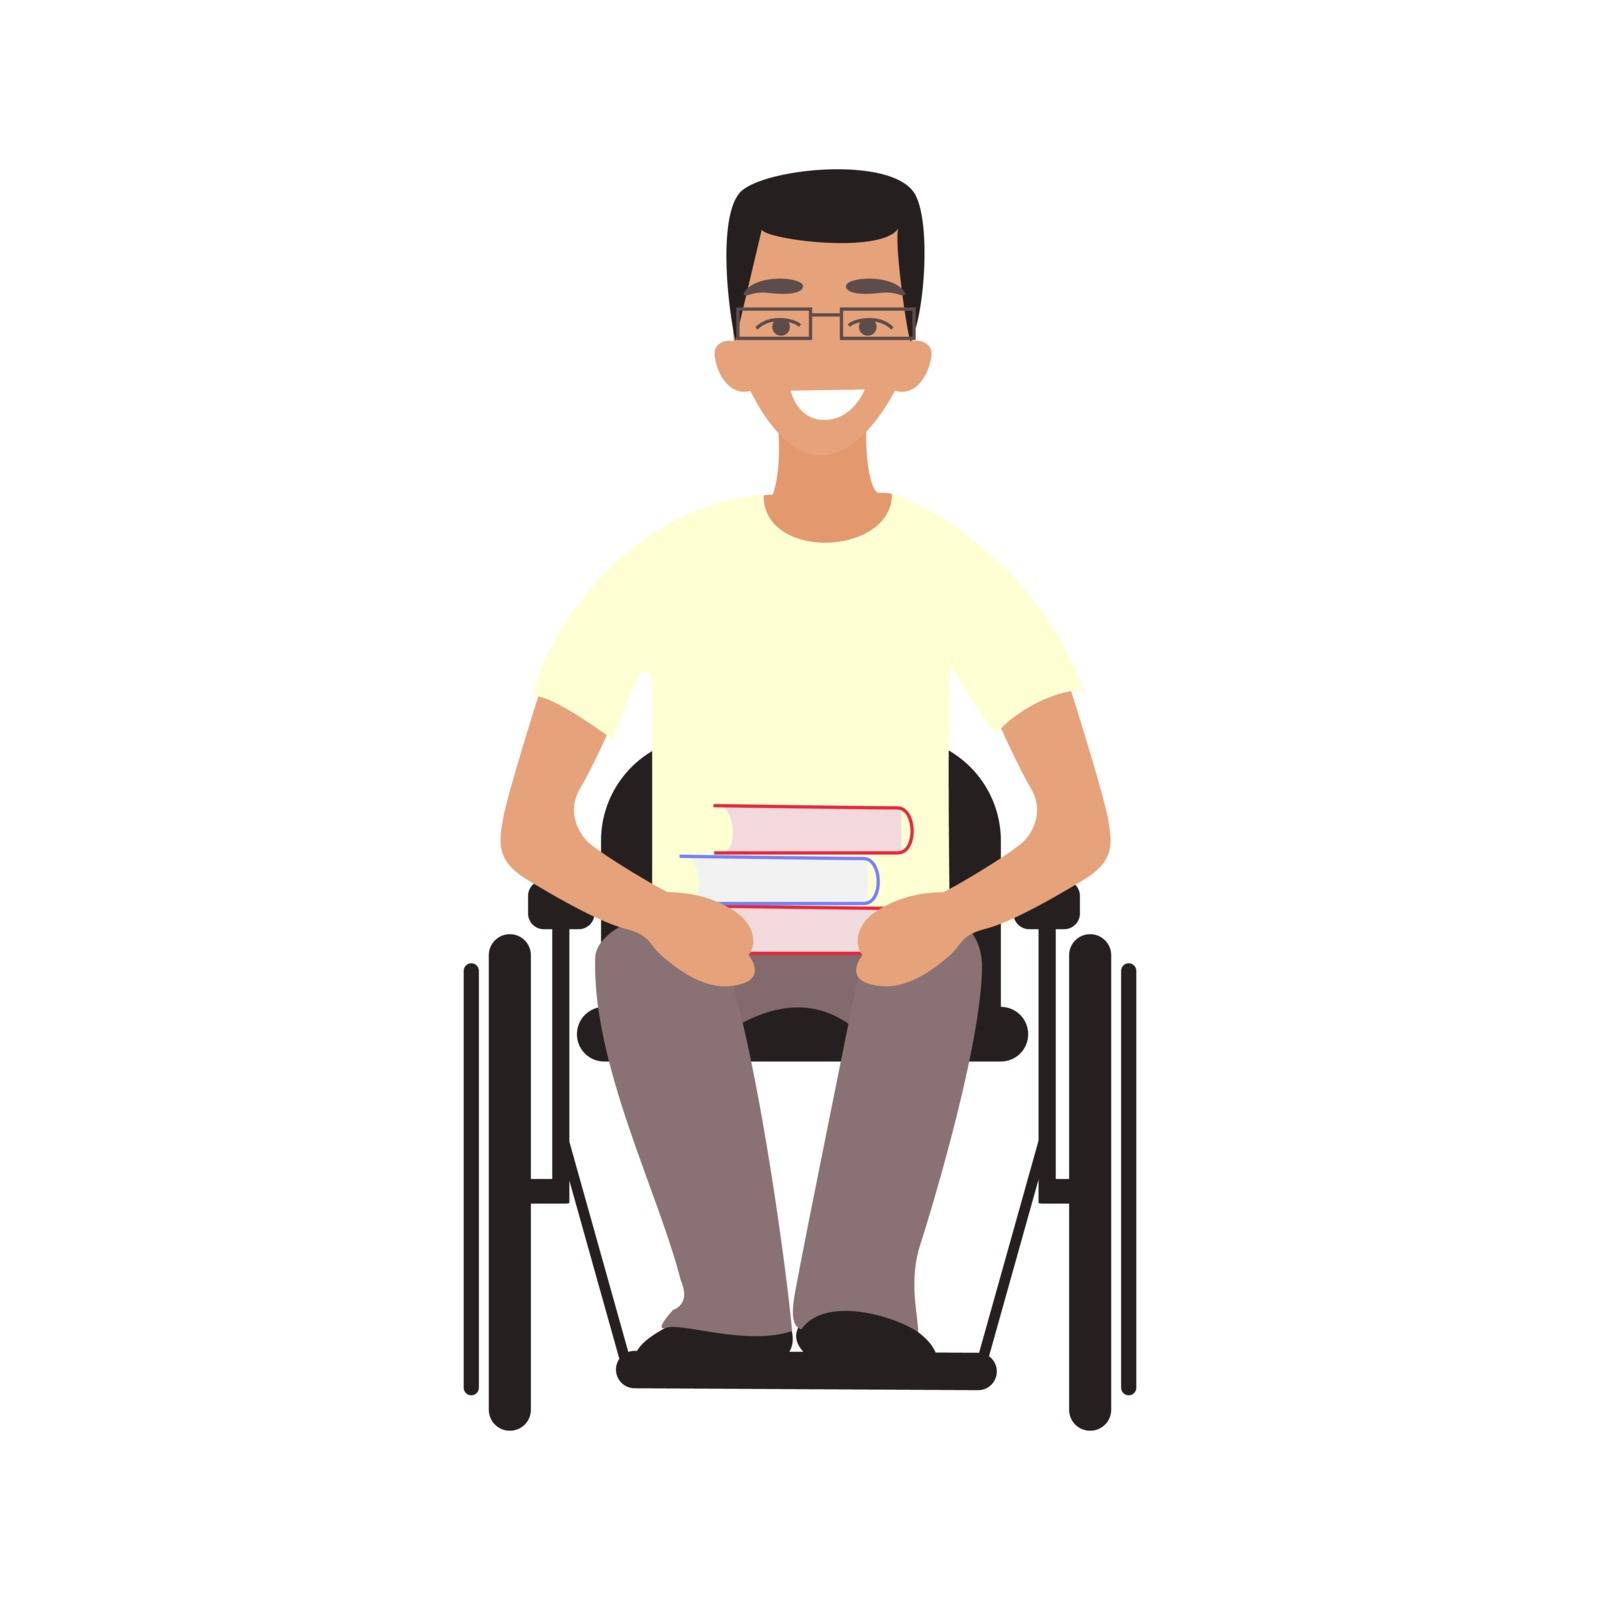 Handicap student sit in whilechair. Disabled teen. Person with disabilities. Teenager with physical disorder. Flat cartoon character. Vector illustration